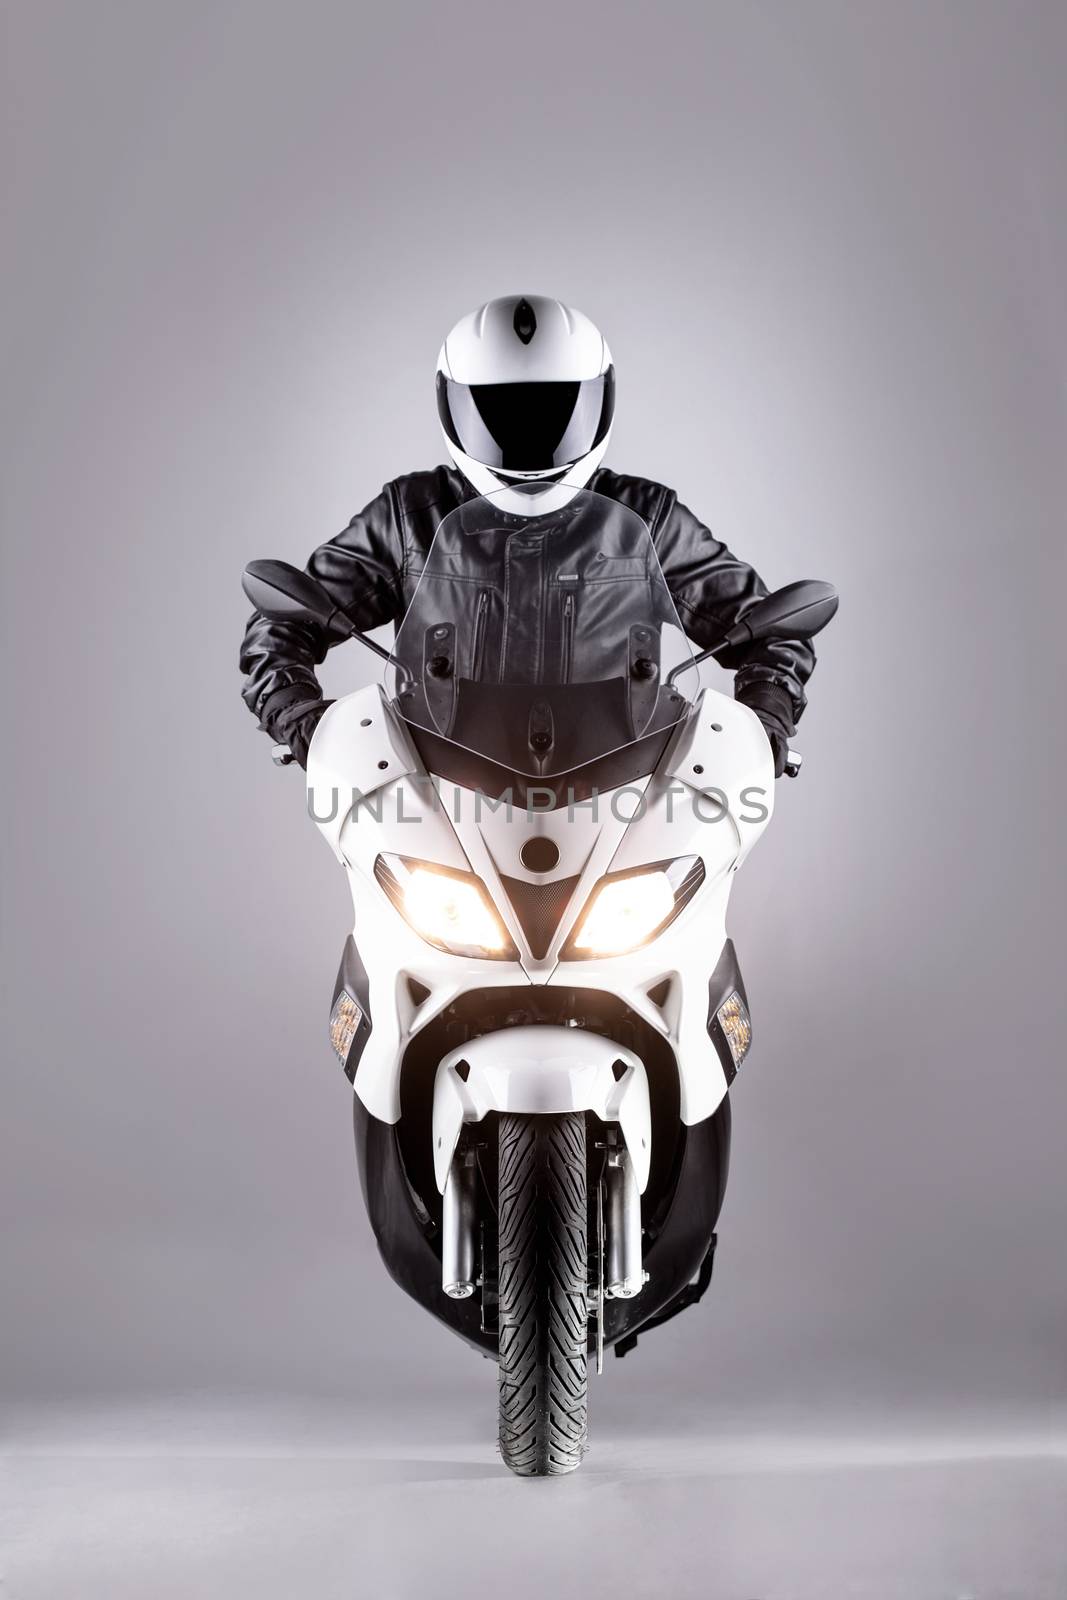 motorist on a motorcycle against gray background